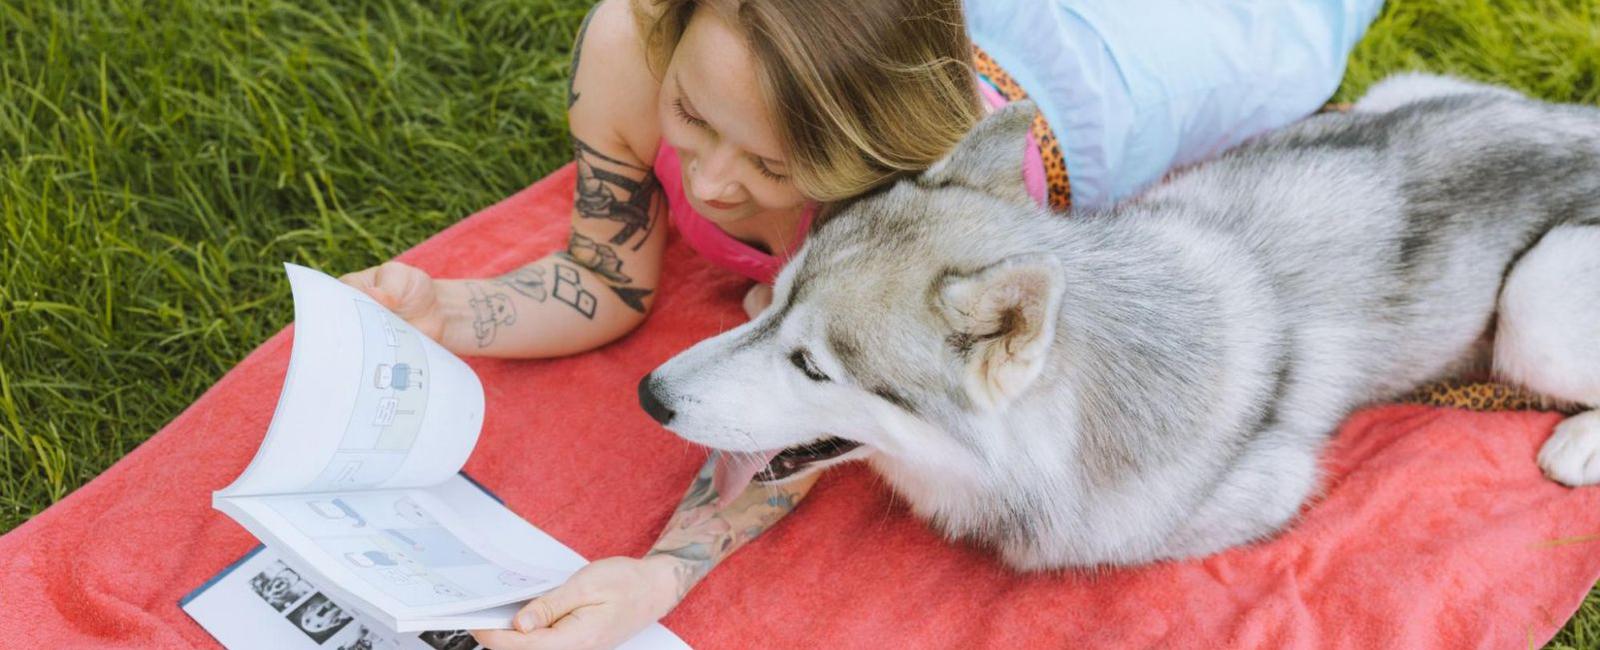 The Intelligent Canine: How Many Total Words Can a Dog Learn?